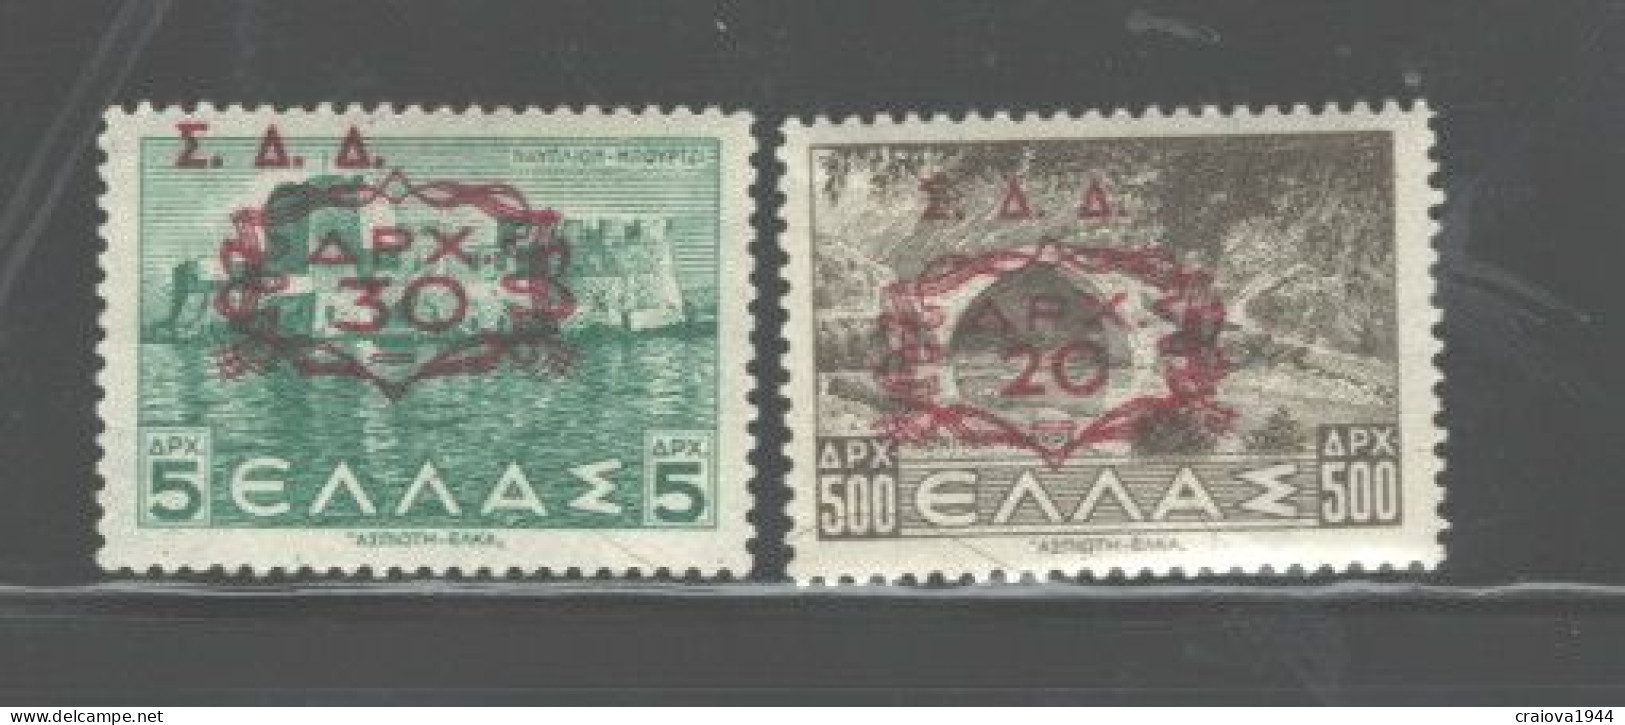 GREECE STAMPS,1947 #N243-N244 OVERPRINT, USED IN DODECANESE ISL. - Dodecaneso